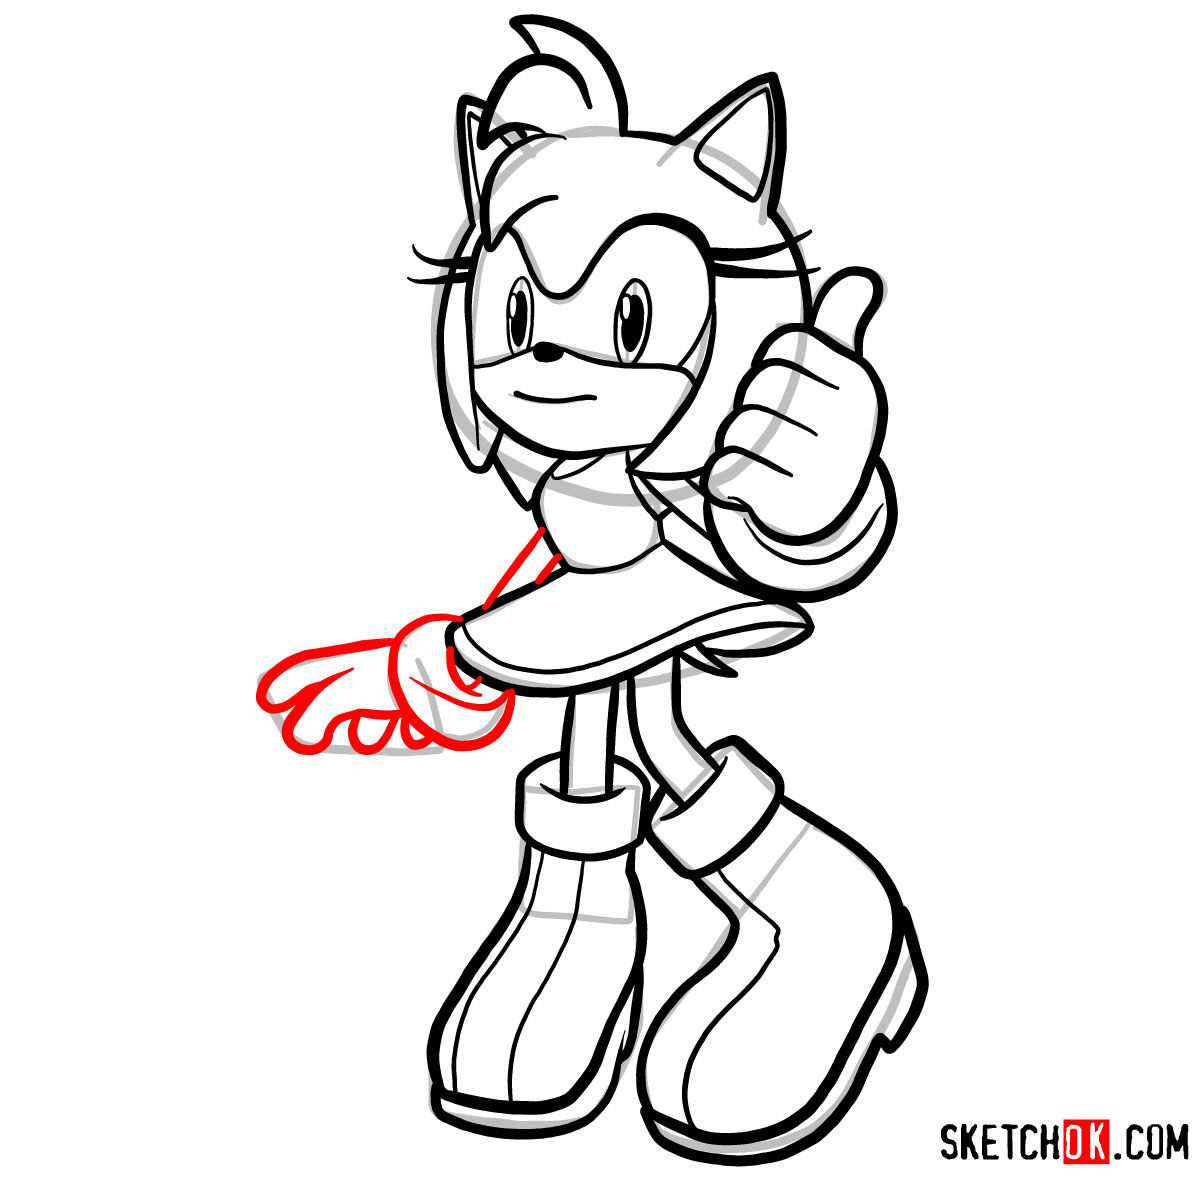 Step-by-step drawing guide of Amy Rose.